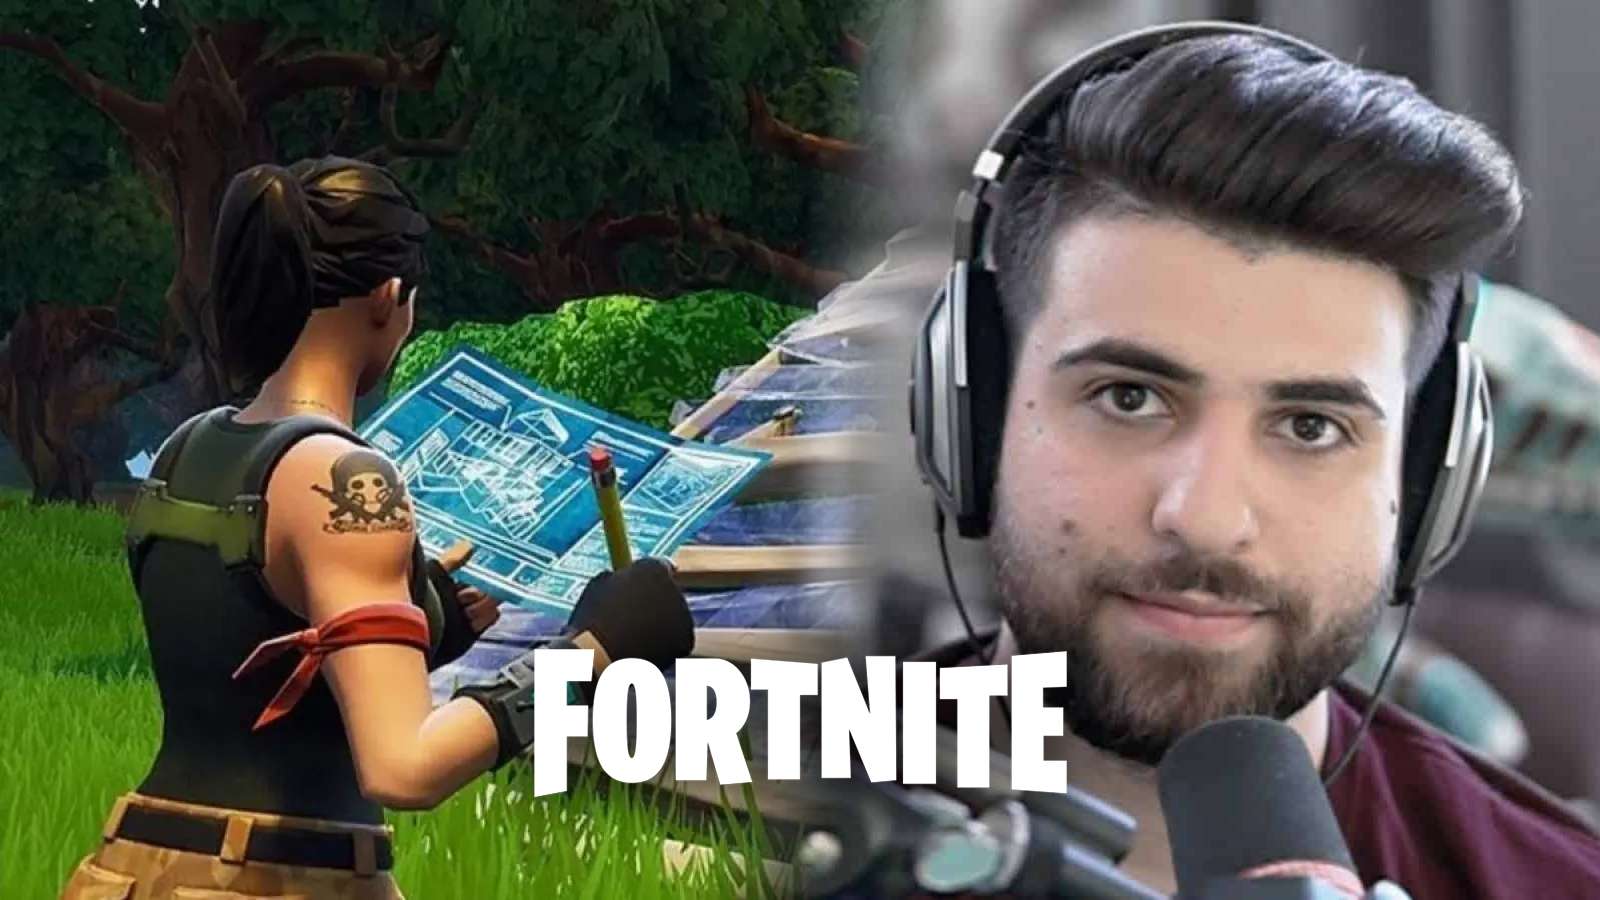 Fortnite pre-editing changes with SypherPK